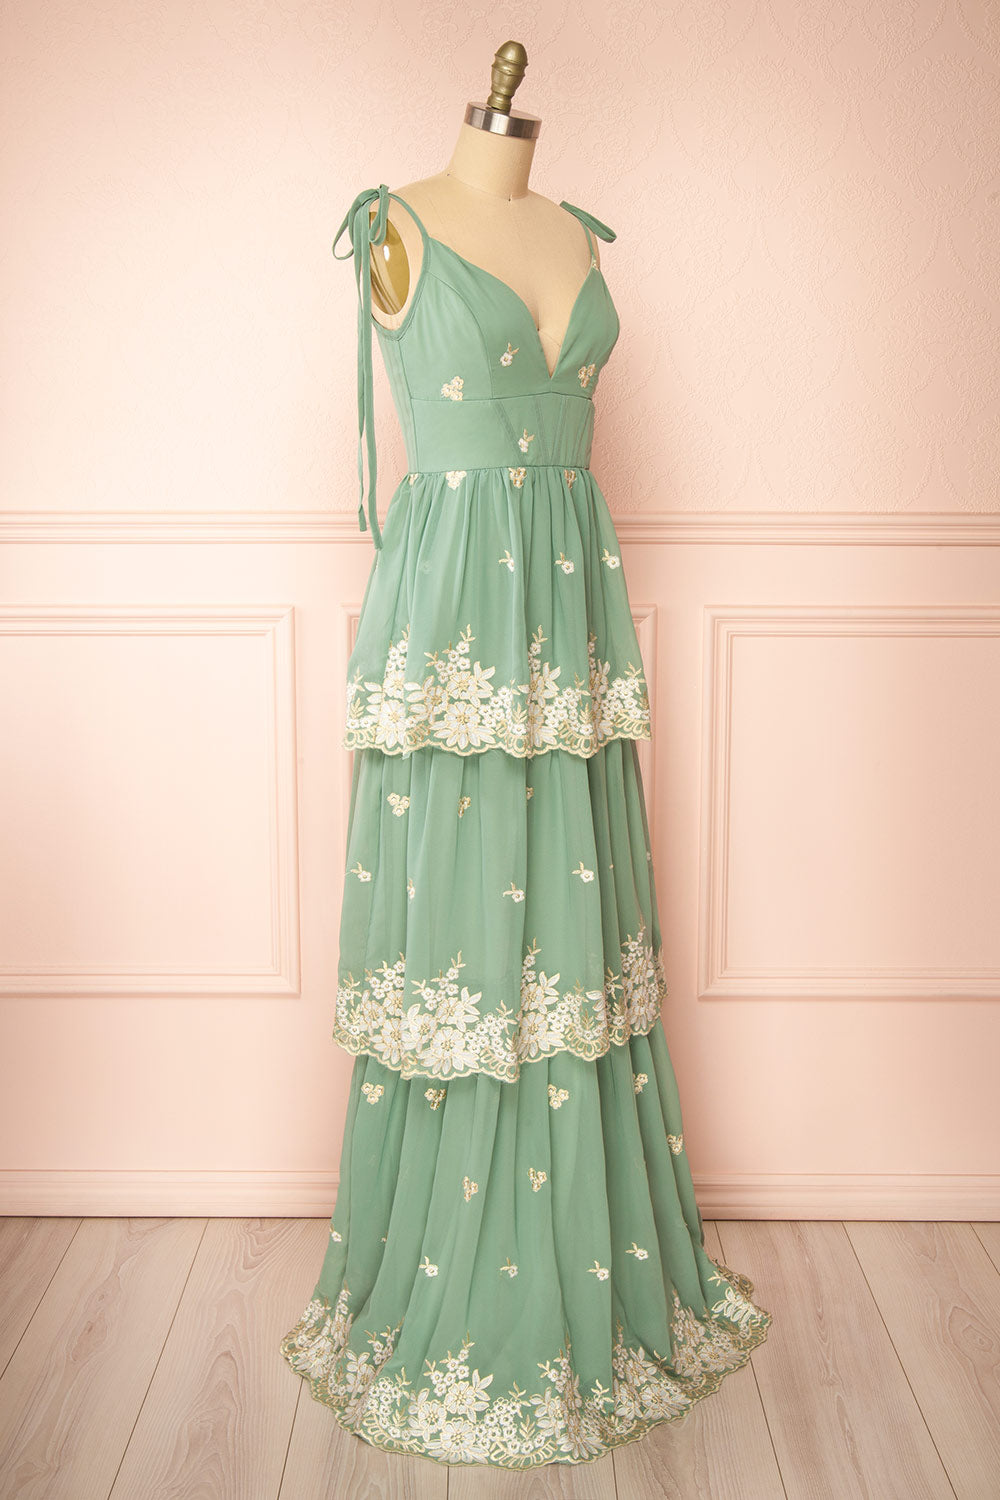 Taliana Sage Chiffon Maxi Dress w/ Floral Embroidery | Boutique 1861 side view